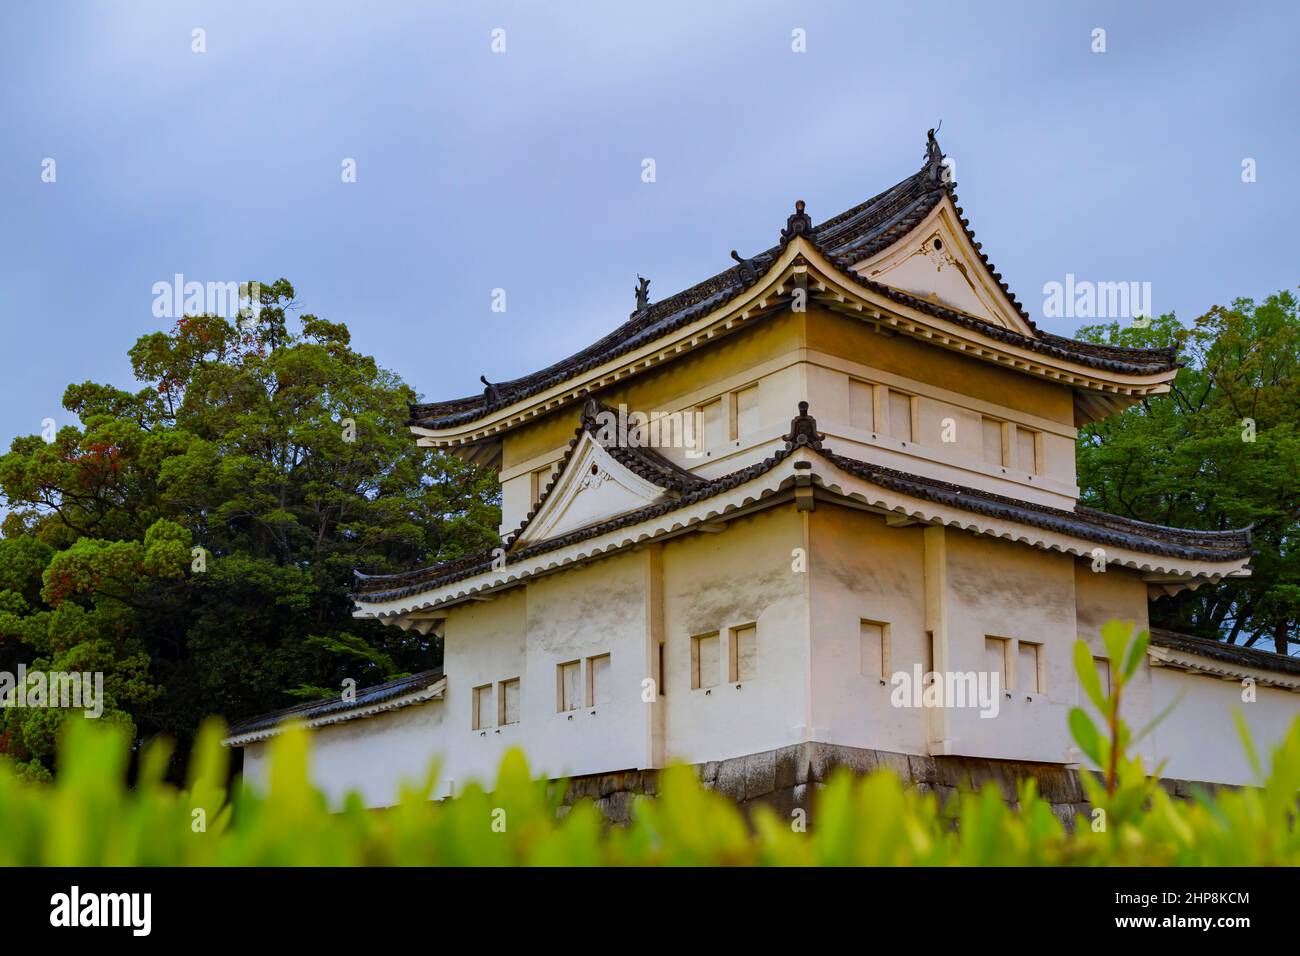 Night exterior view of the Nijo castle at Kyoto, Japan Stock Photo